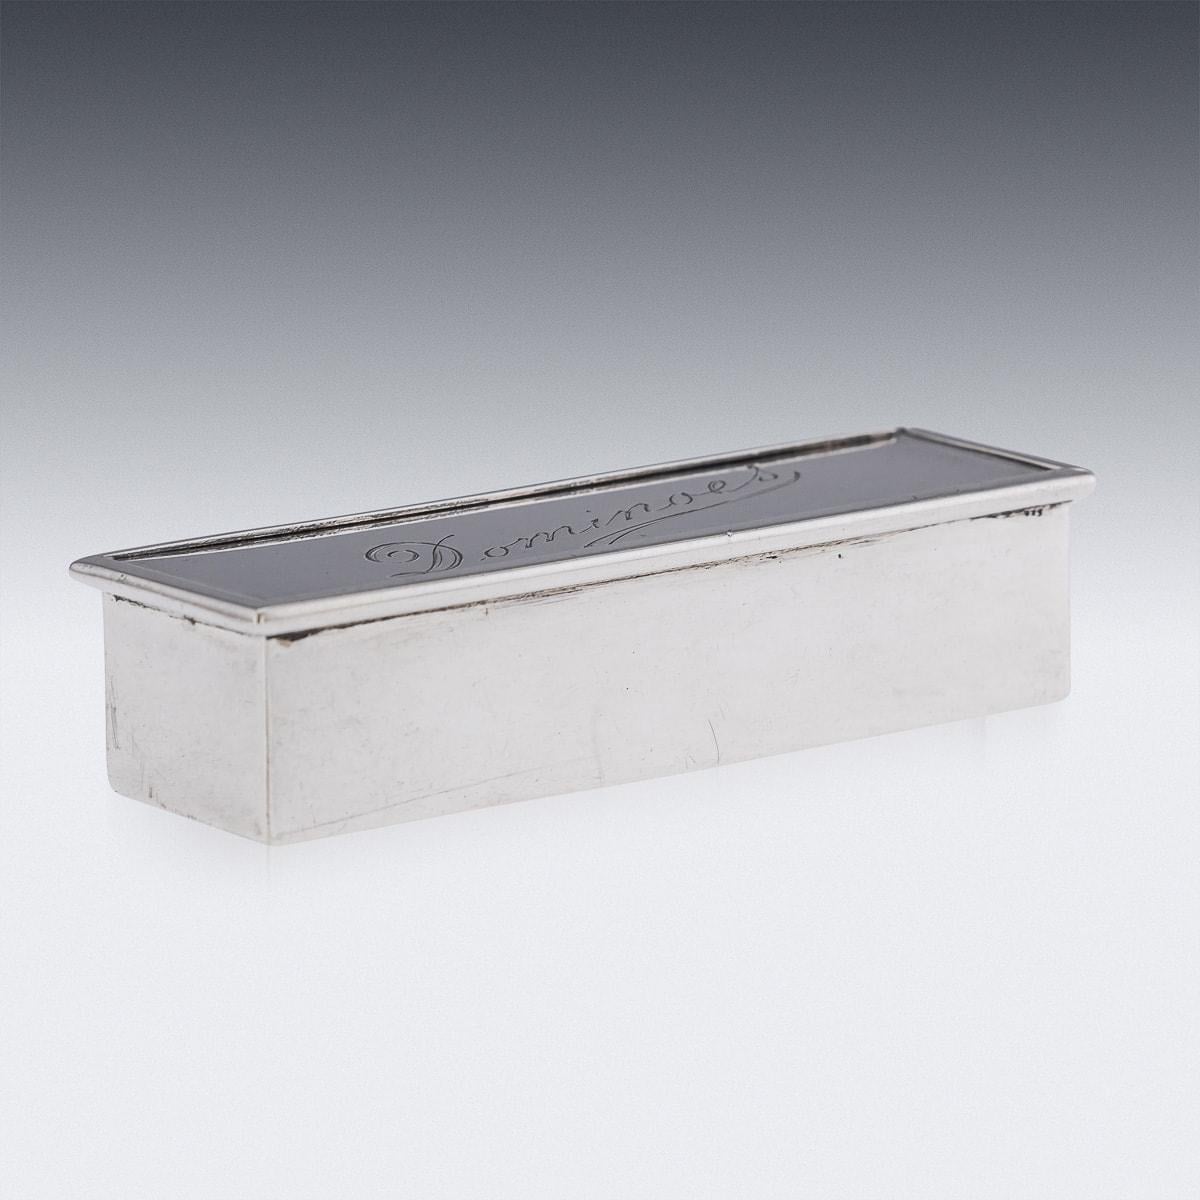 Antique early 20th Century Victorian solid silver domino game. Comes in a rectangular box with slide off lid, engraved Dominoes, containing bone carved domino pieces. Hallmarked English silver (925 standard), circa 1900, London, Maker GY&CO (Grey &